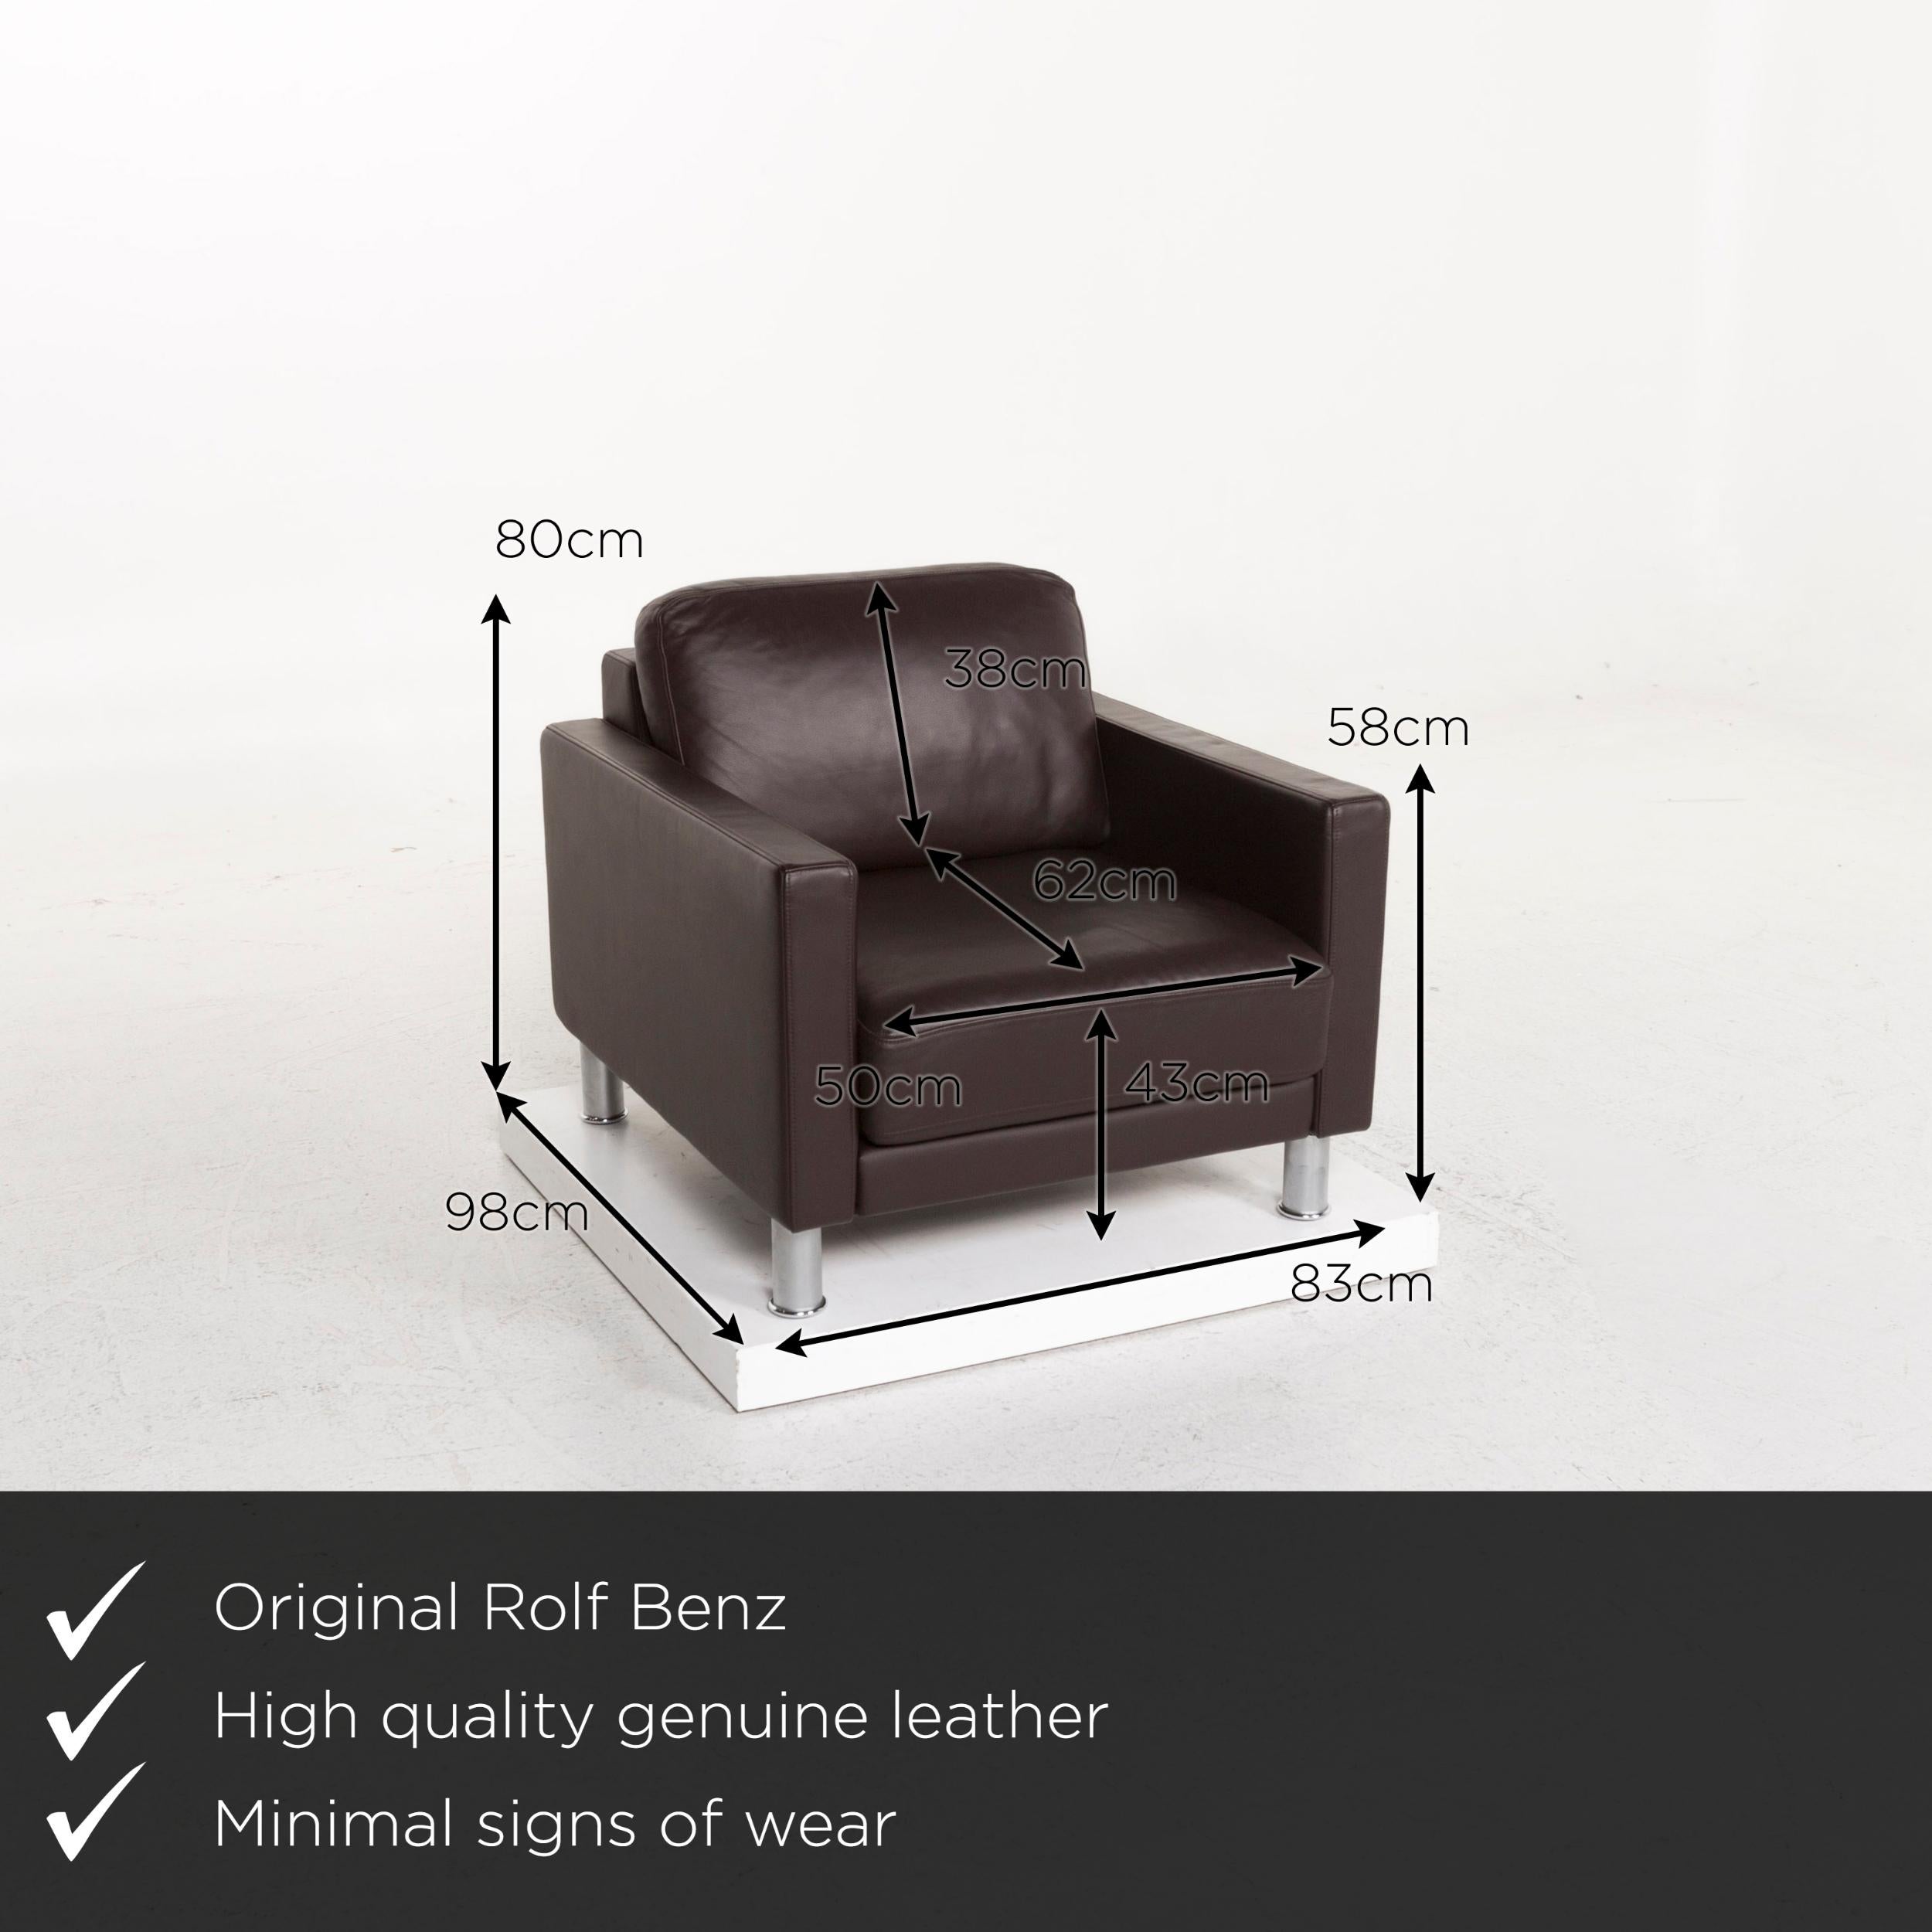 We present to you a Rolf Benz leather armchair brown dark brown.

 

 Product measurements in centimeters:
 

Depth 98
Width 83
Height 80
Seat height 43
Rest height 58
Seat depth 62
Seat width 38.

  